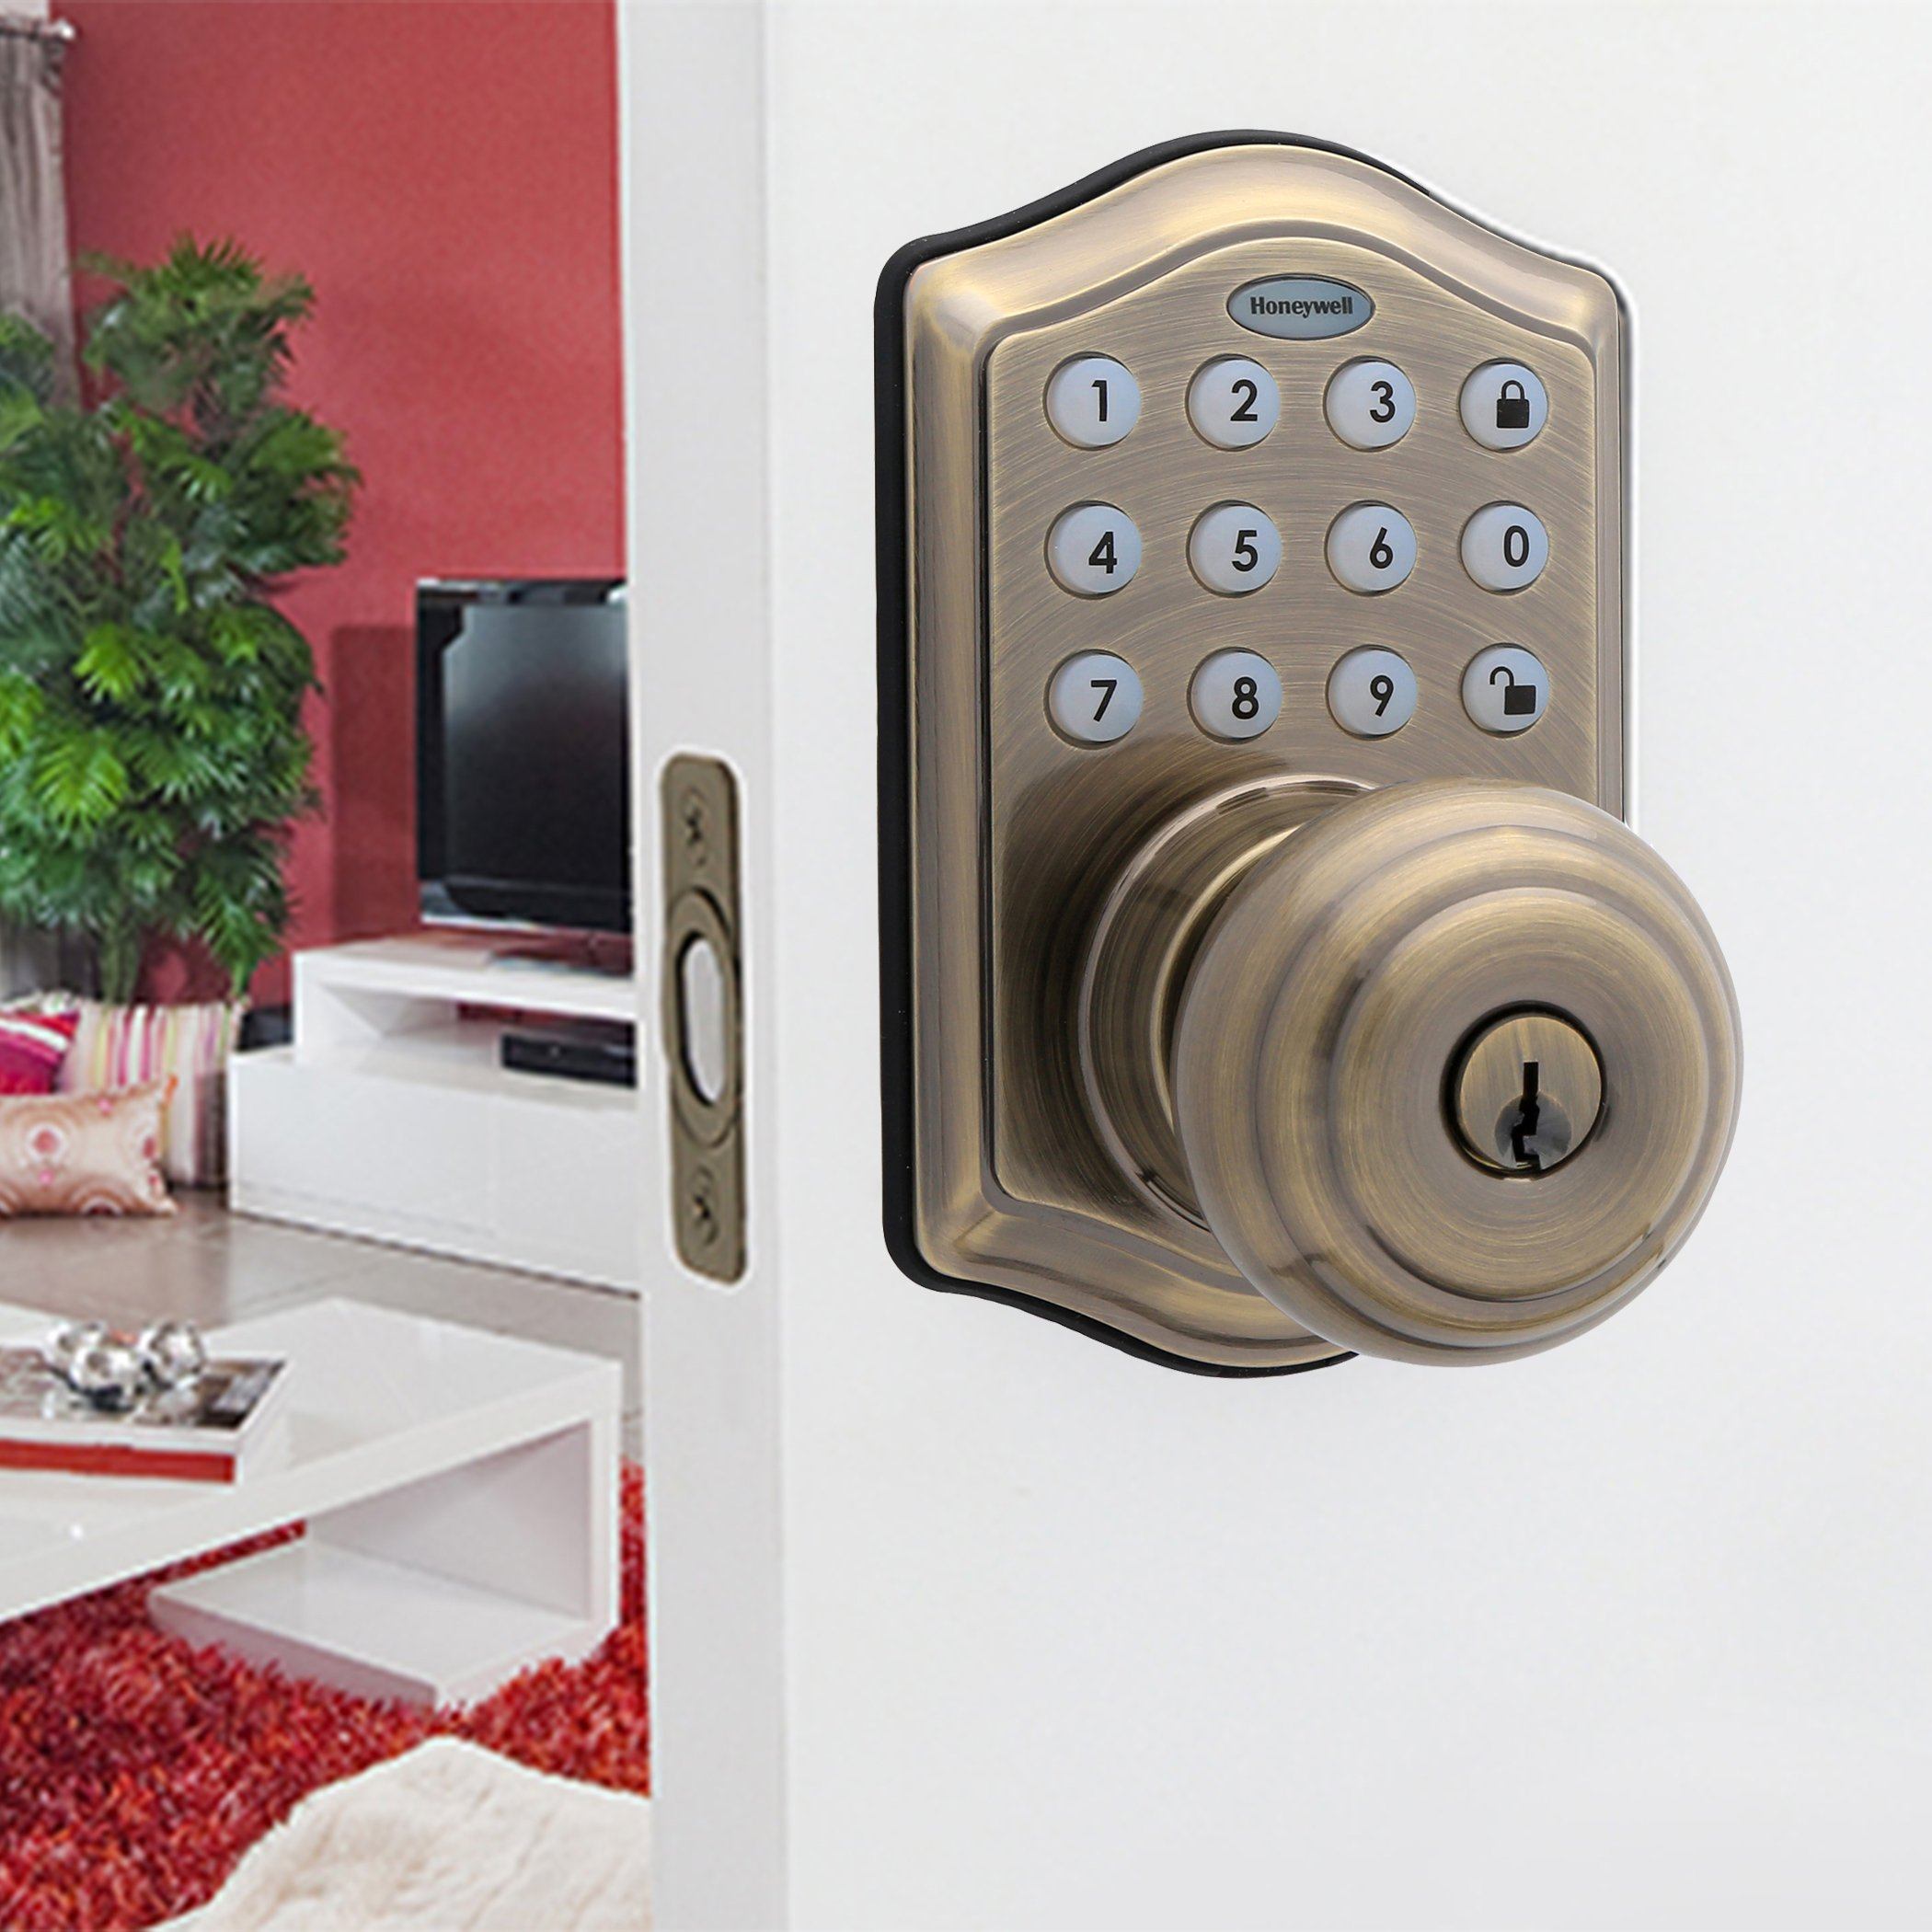 Honeywell 8732101 Electronic Entry Knob Door Lock with Keypad in Antique Brass